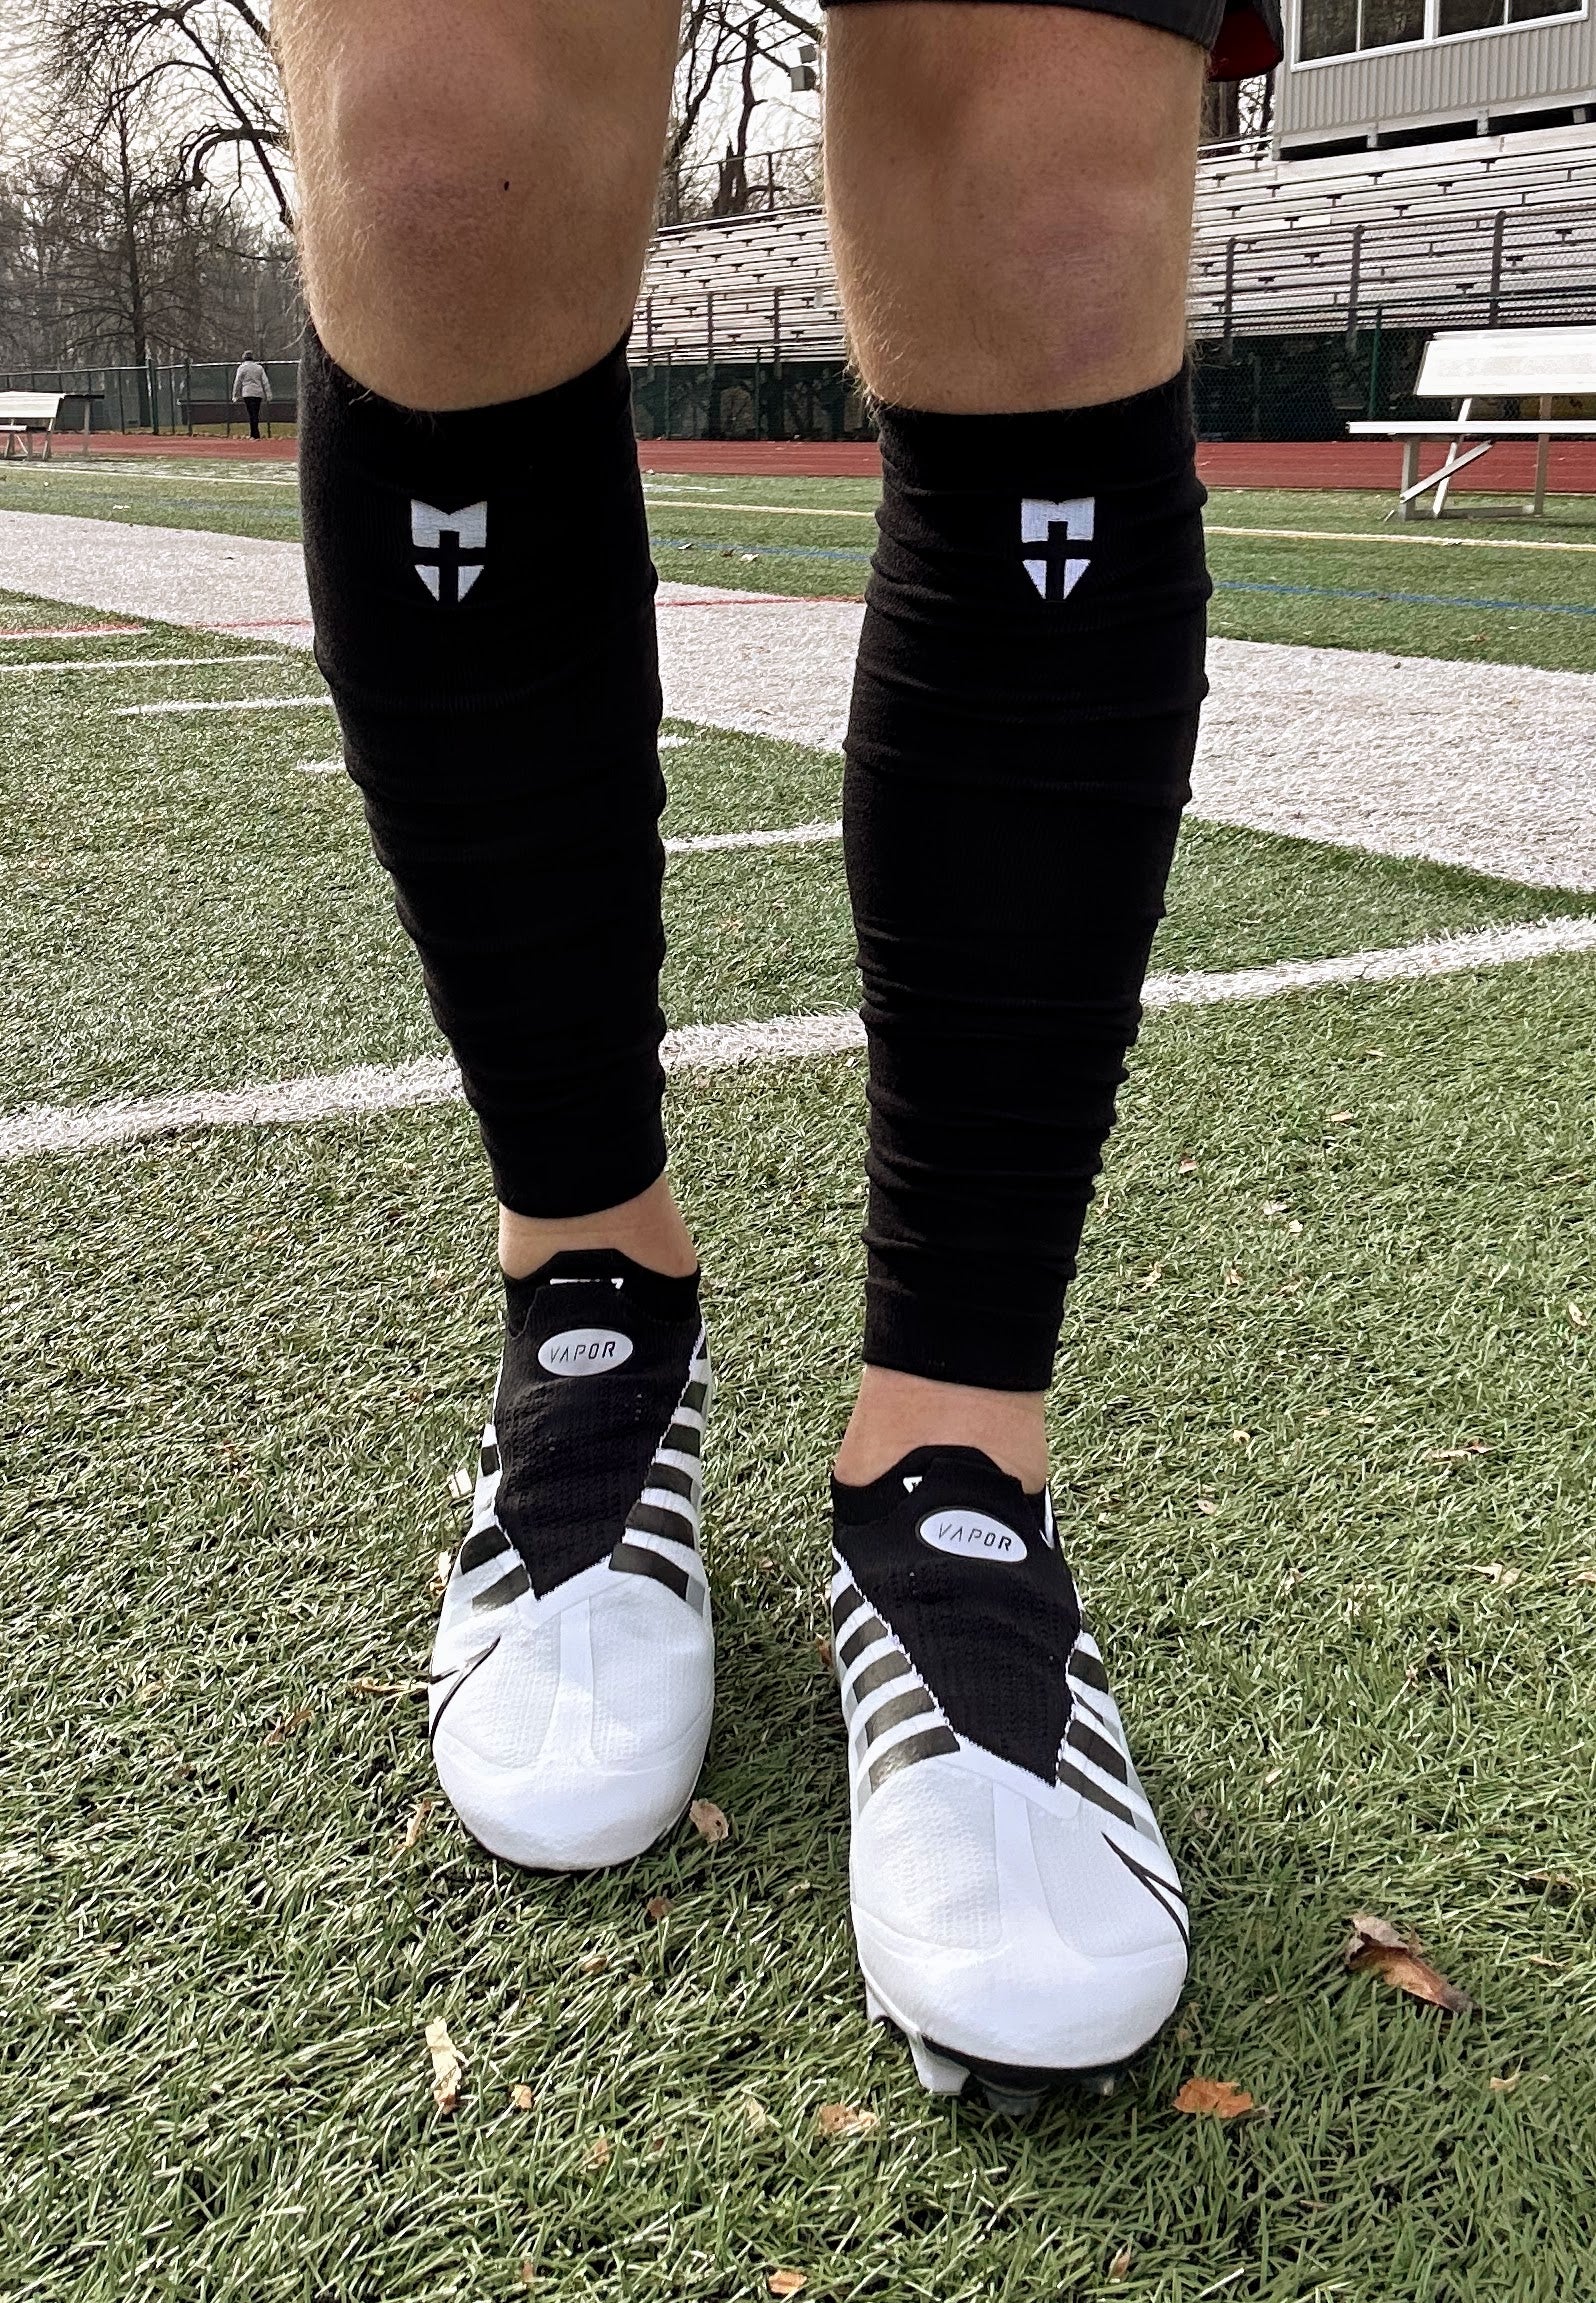 Sports Unlimited Gameday Drip Scrunch Football Leg Sleeves \ Calf Sleeves,  Sold as a Pair